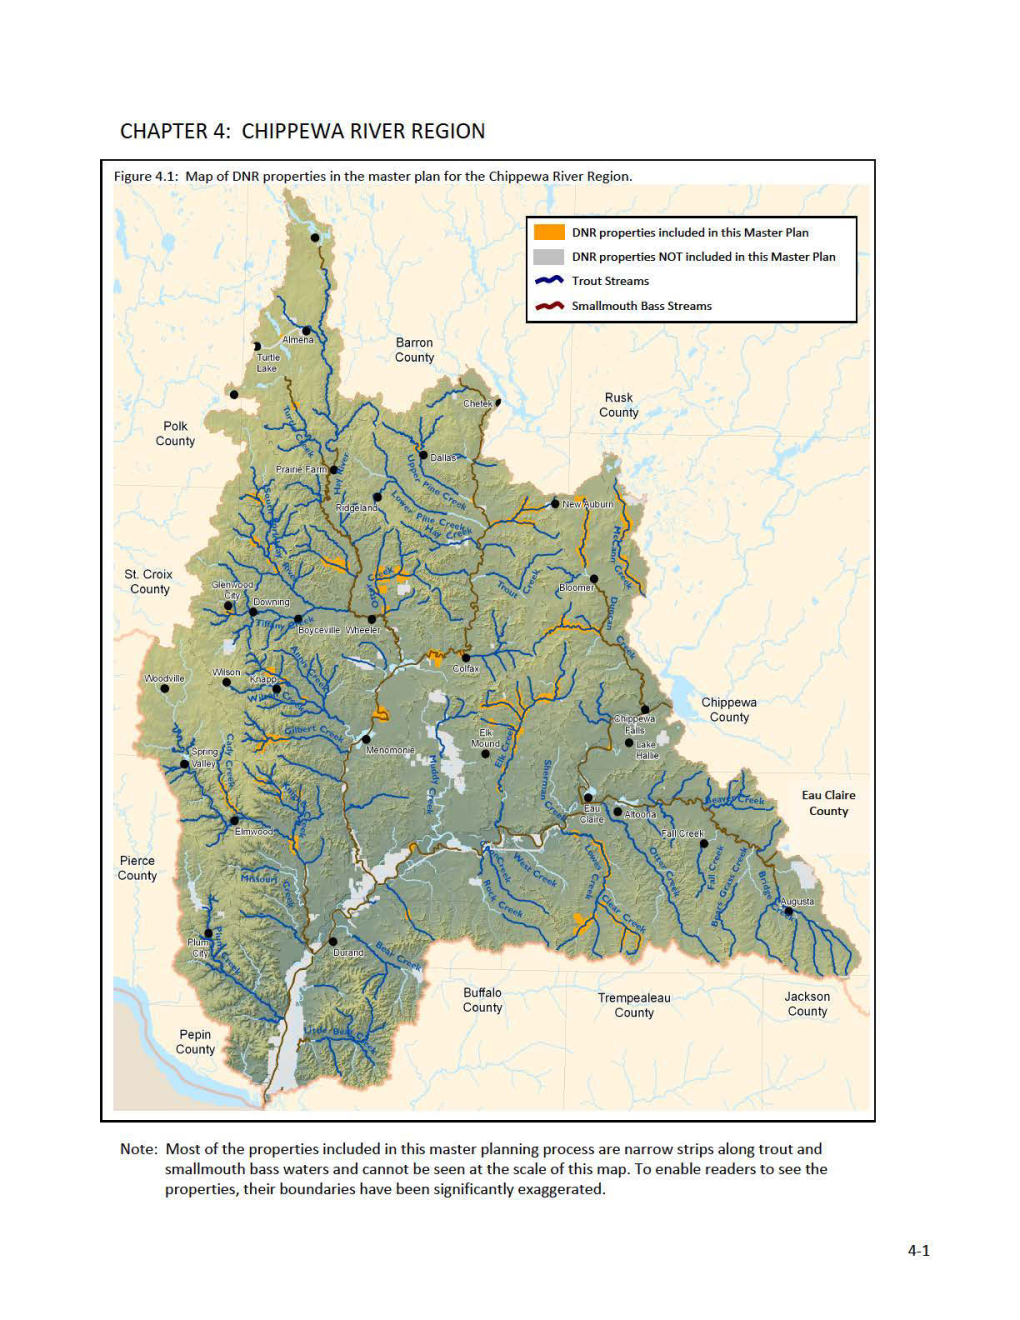 And Sub-Watersheds (HUC 12) of the Chippewa River Region